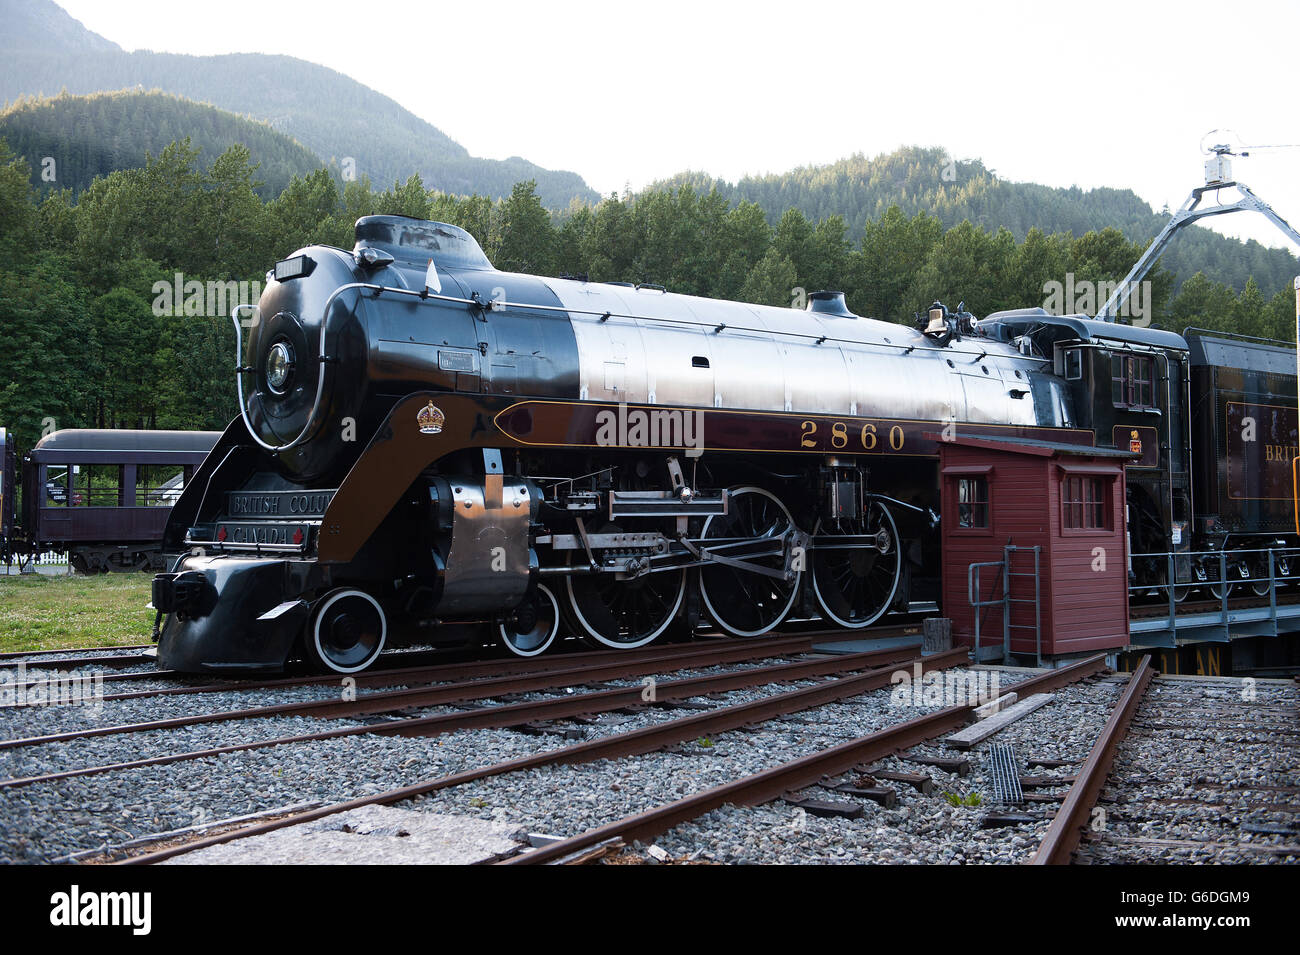 The Royal Hudson, a 1940's steam locomotive engine, at the West Coast Railway Heritage Museum.  Squamish BC, Canada Stock Photo